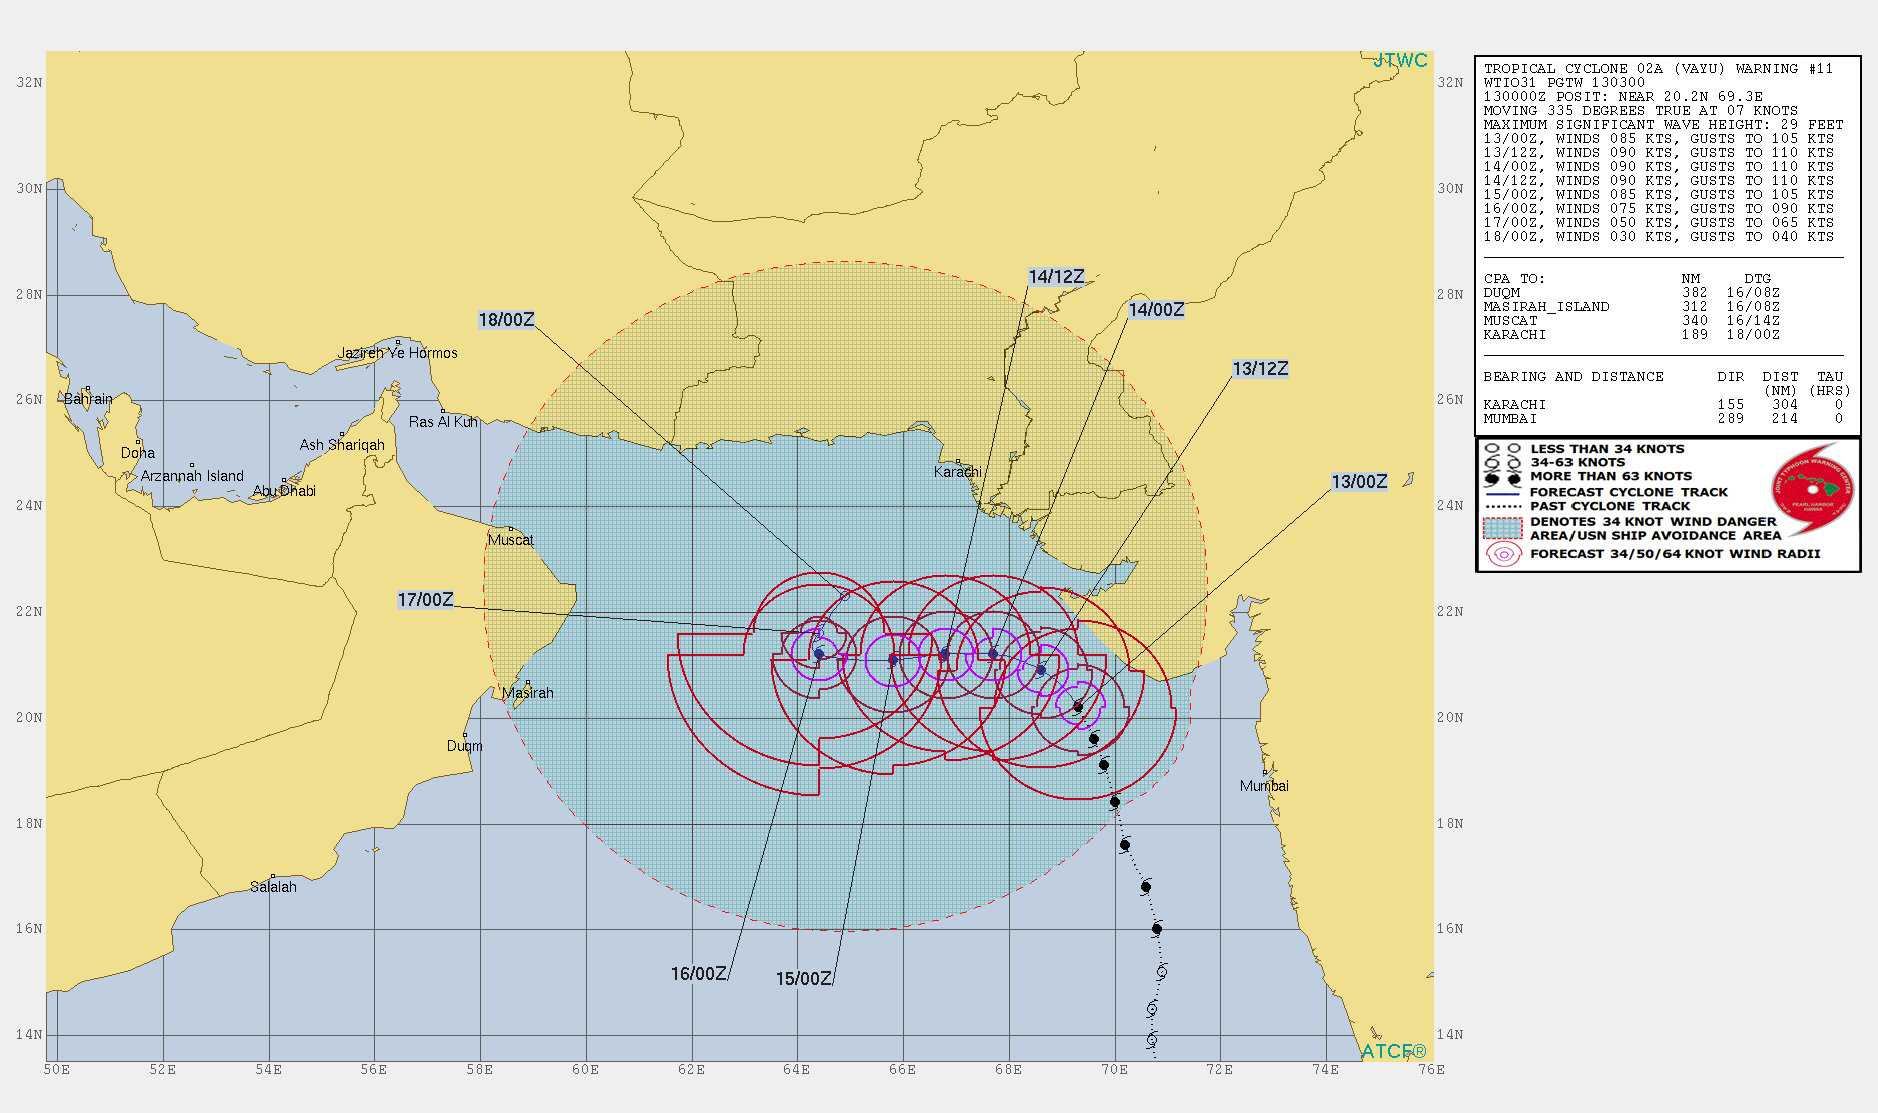 INTENSITY FORECAST TO REMAIN MORE OR LESS STEADY NEXT 48H